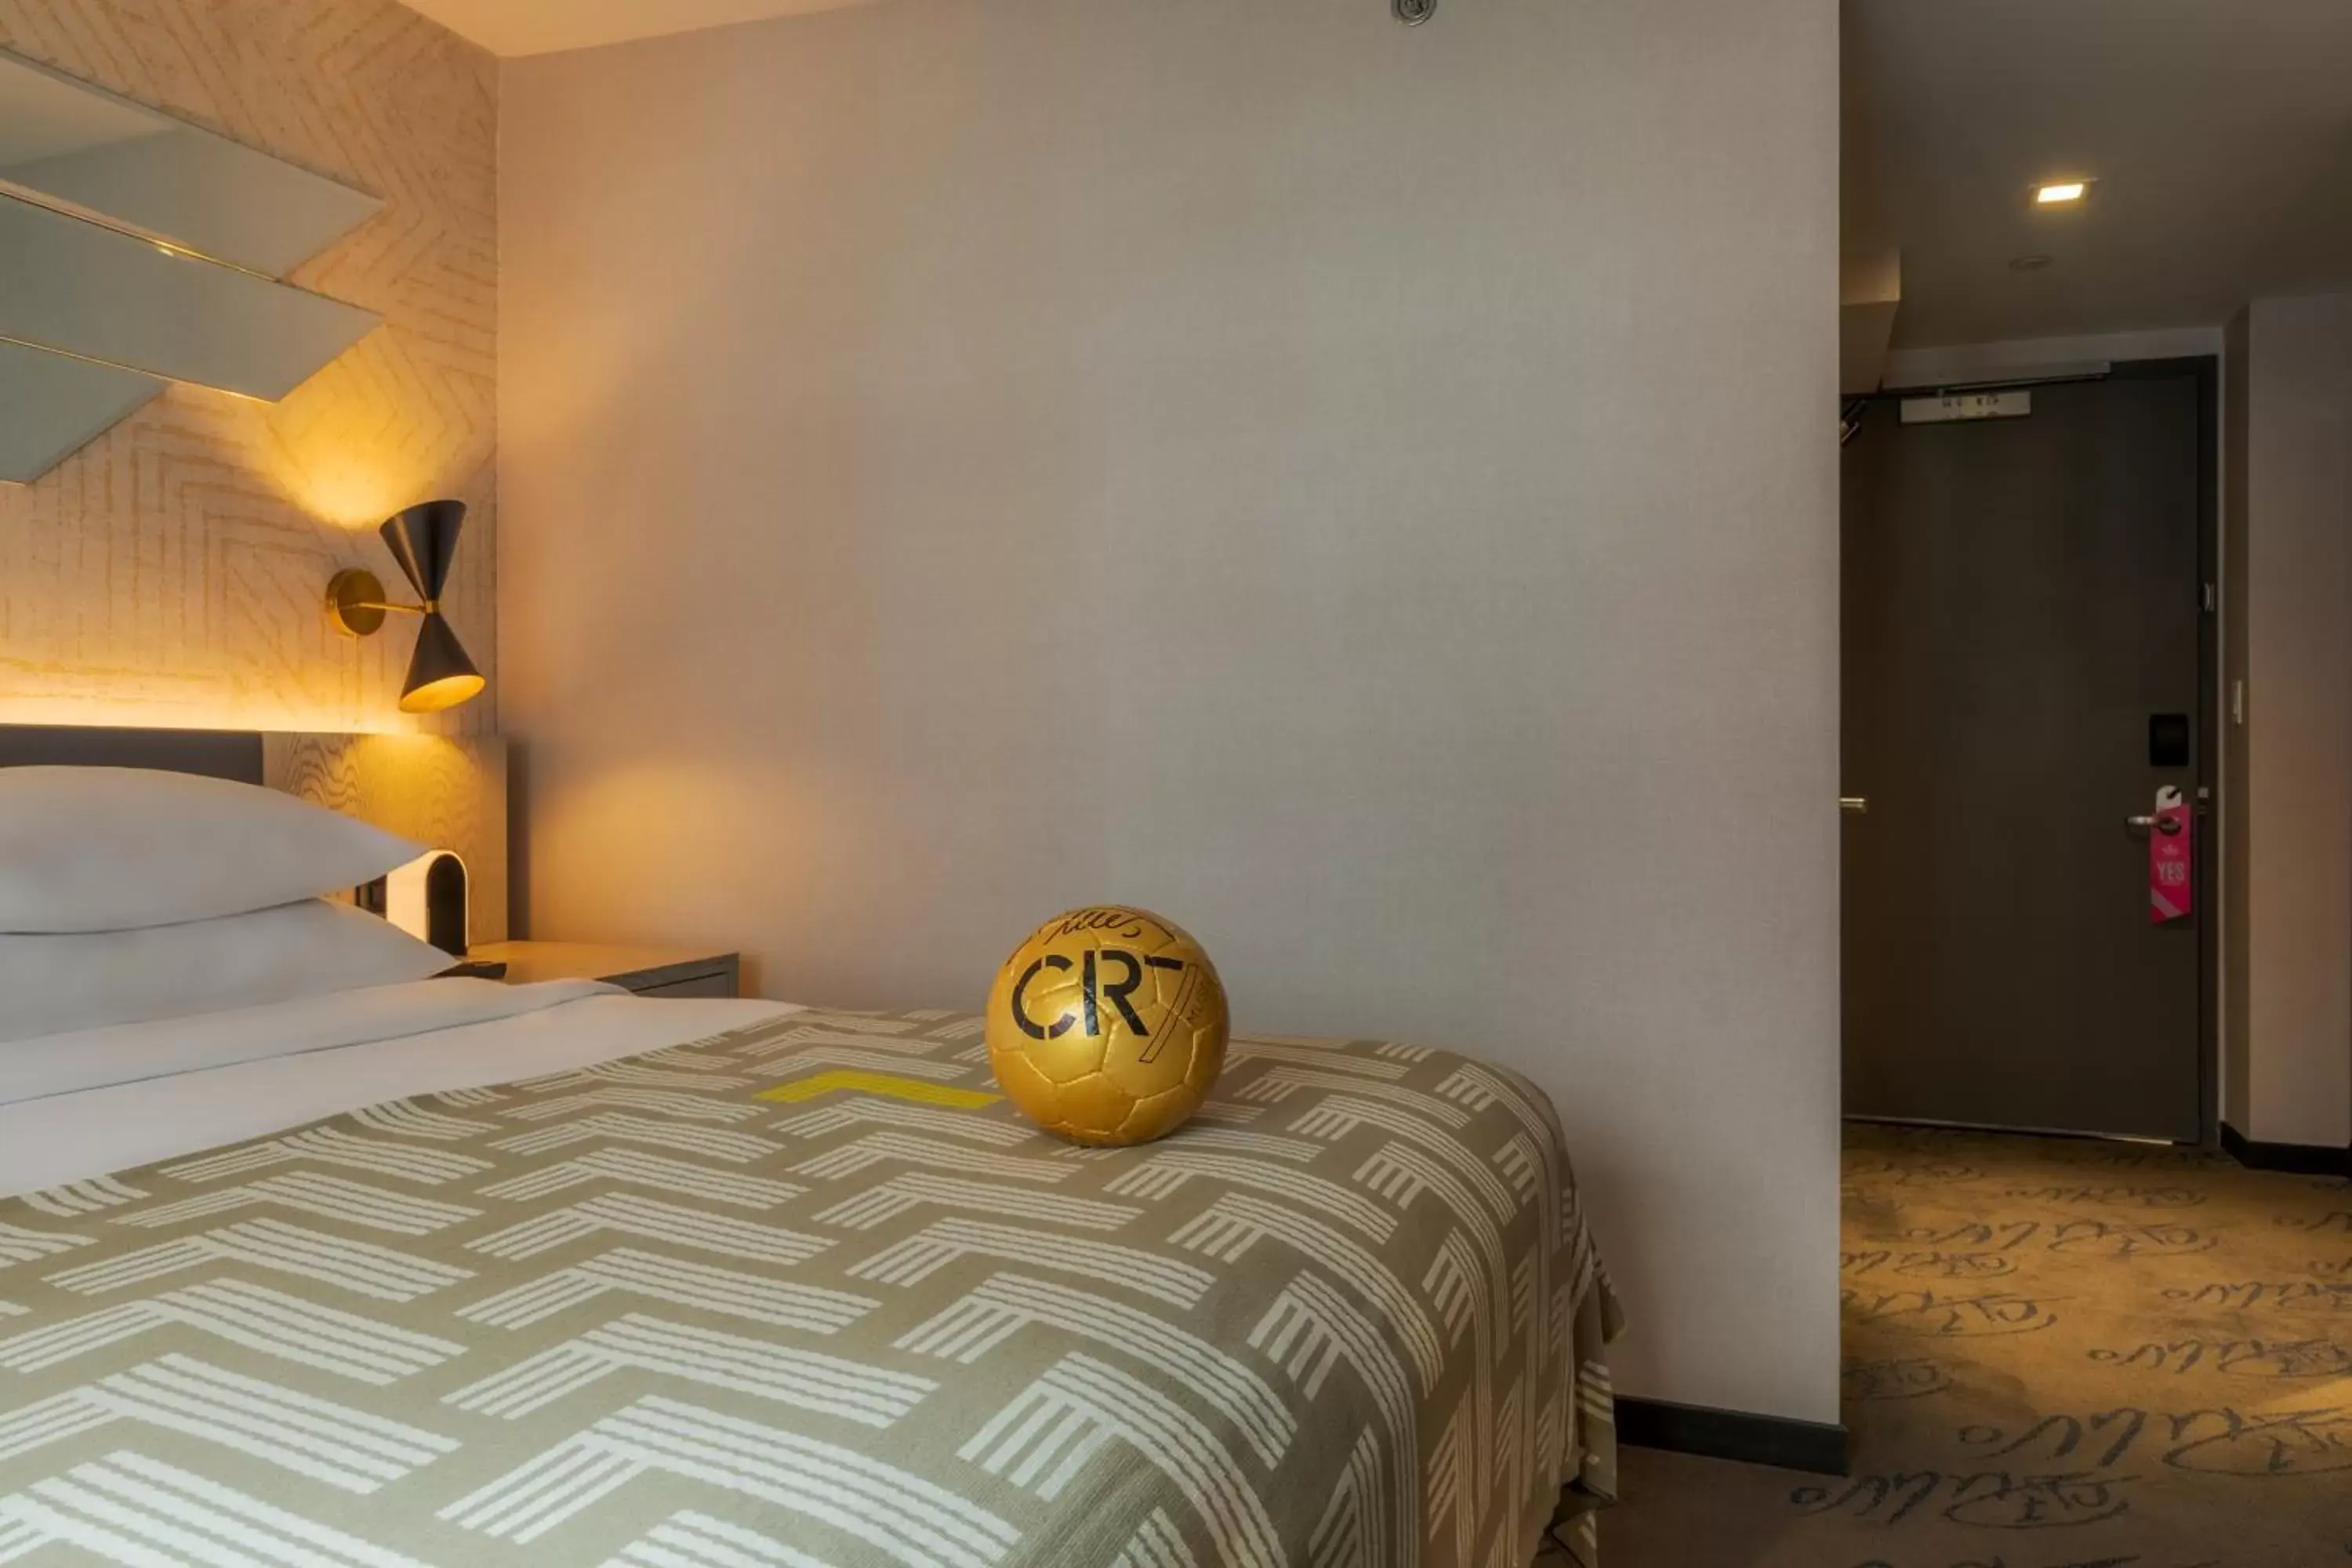 Decorative detail, Bed in Pestana CR7 Times Square